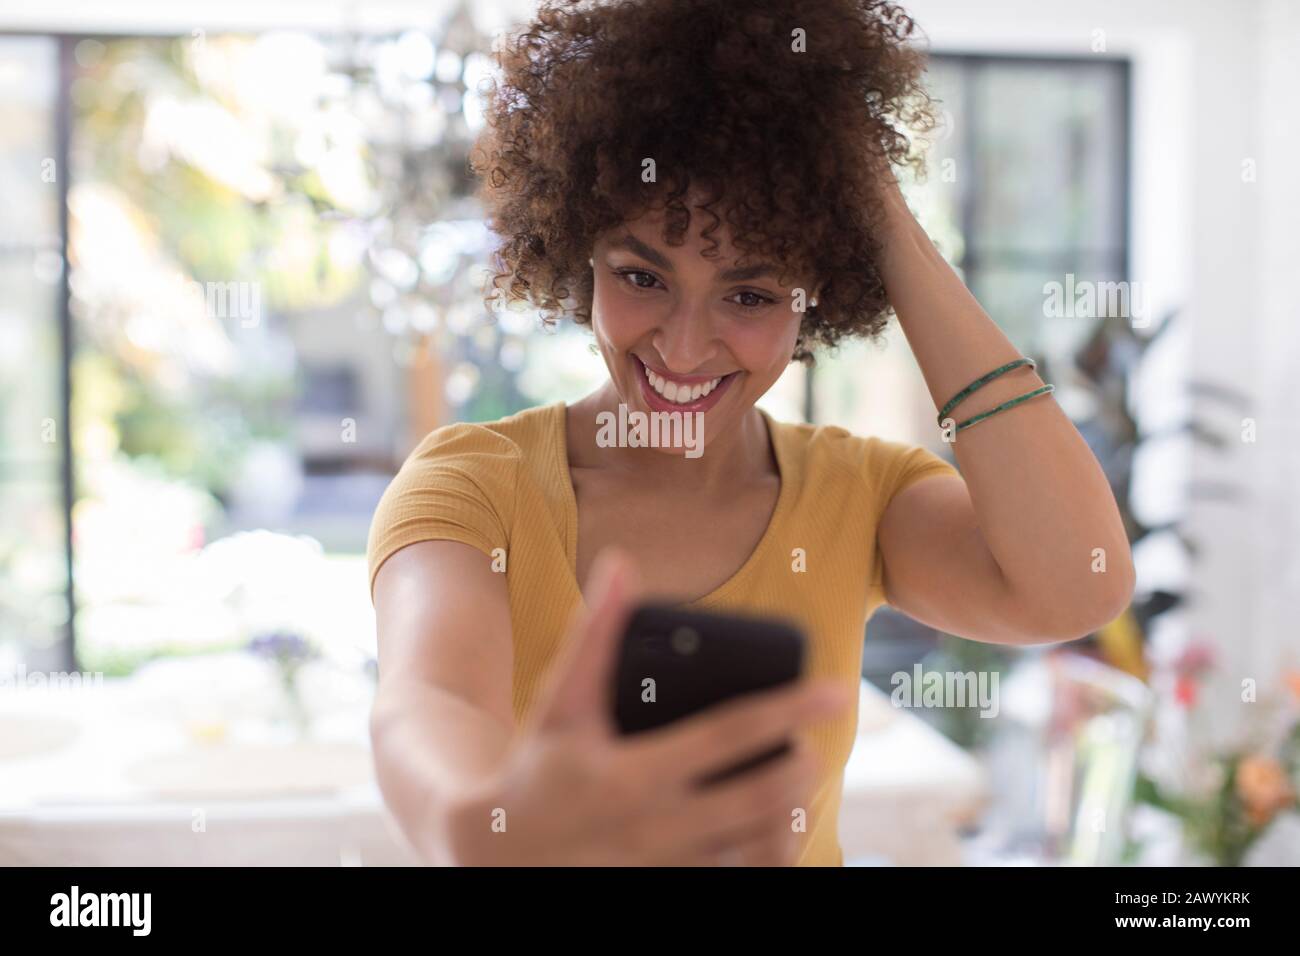 Confident smiling young woman taking selfie with camera phone Stock Photo